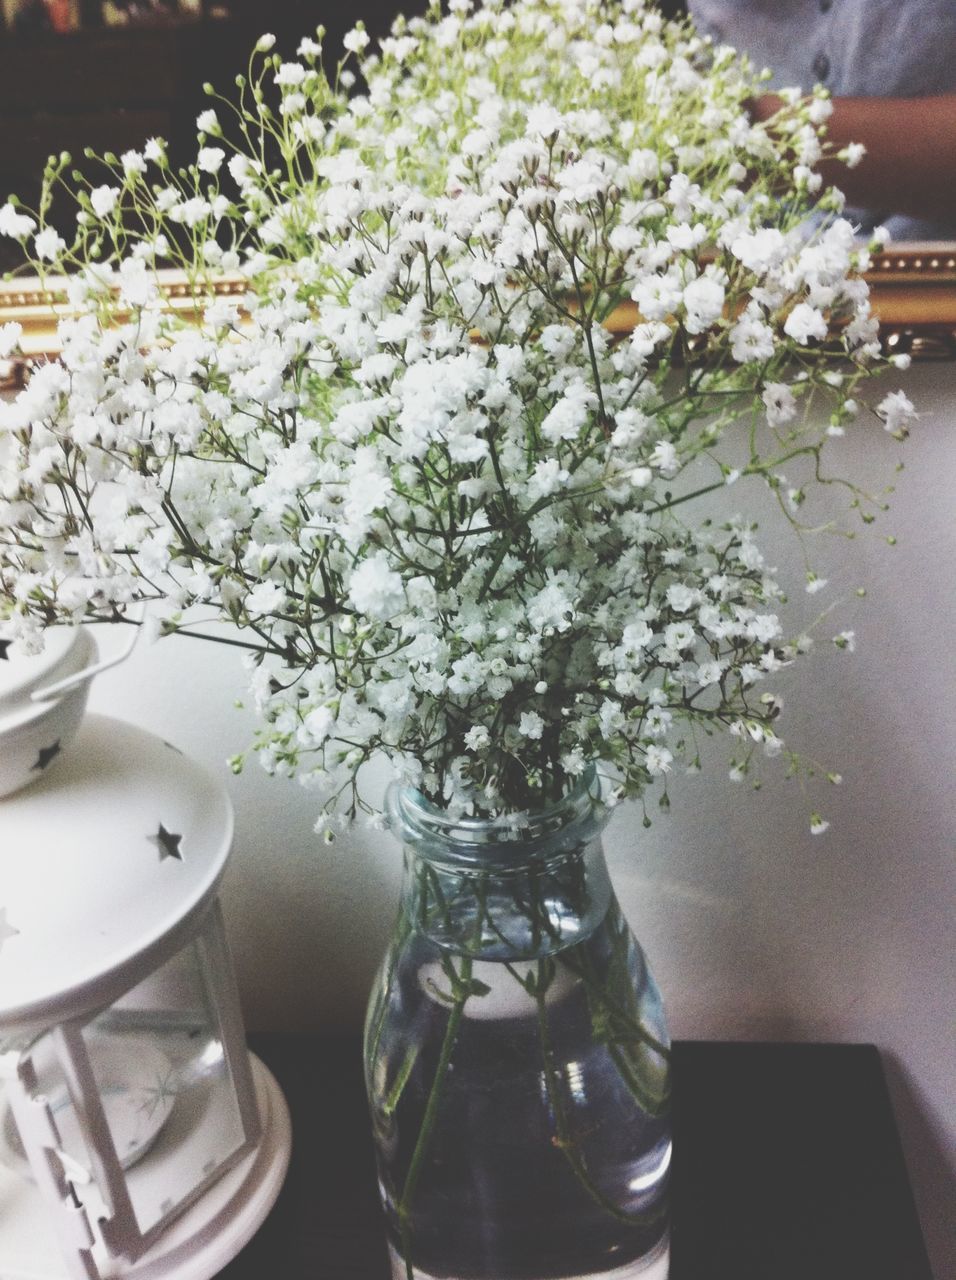 flower, vase, indoors, fragility, freshness, table, glass - material, petal, potted plant, flower arrangement, transparent, decoration, plant, close-up, growth, white color, home interior, bunch of flowers, focus on foreground, flower head